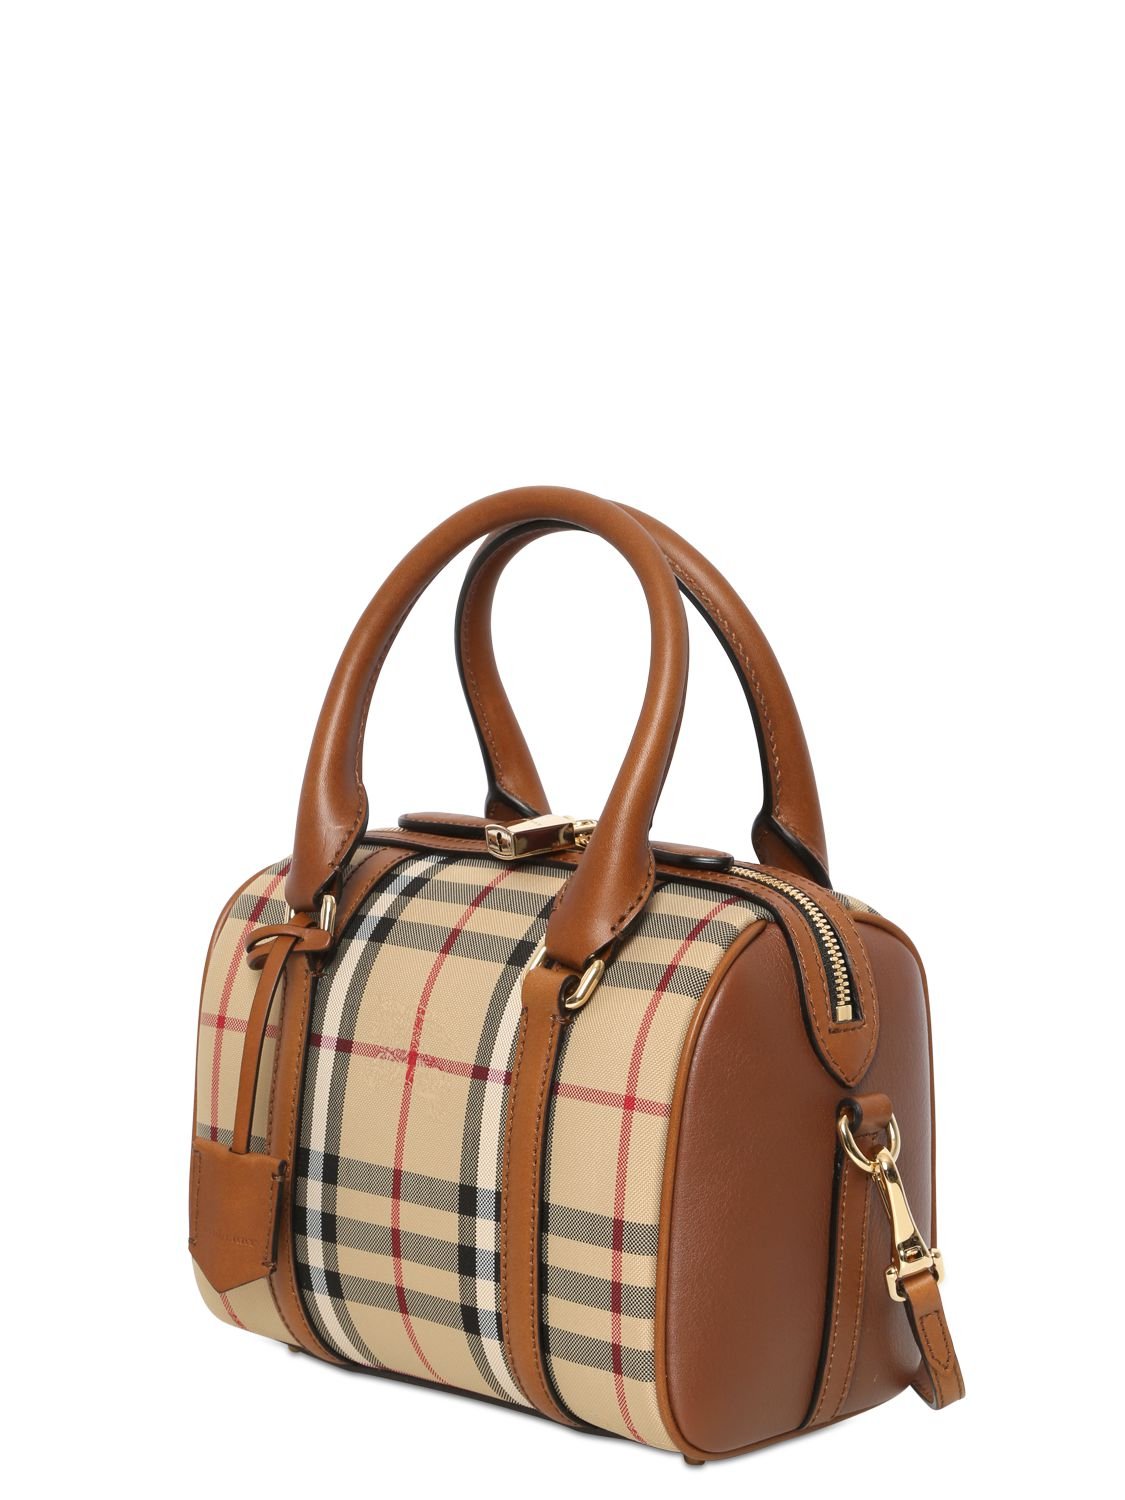 Burberry Small Alchester Bridle House Check Bag in Brown - Lyst